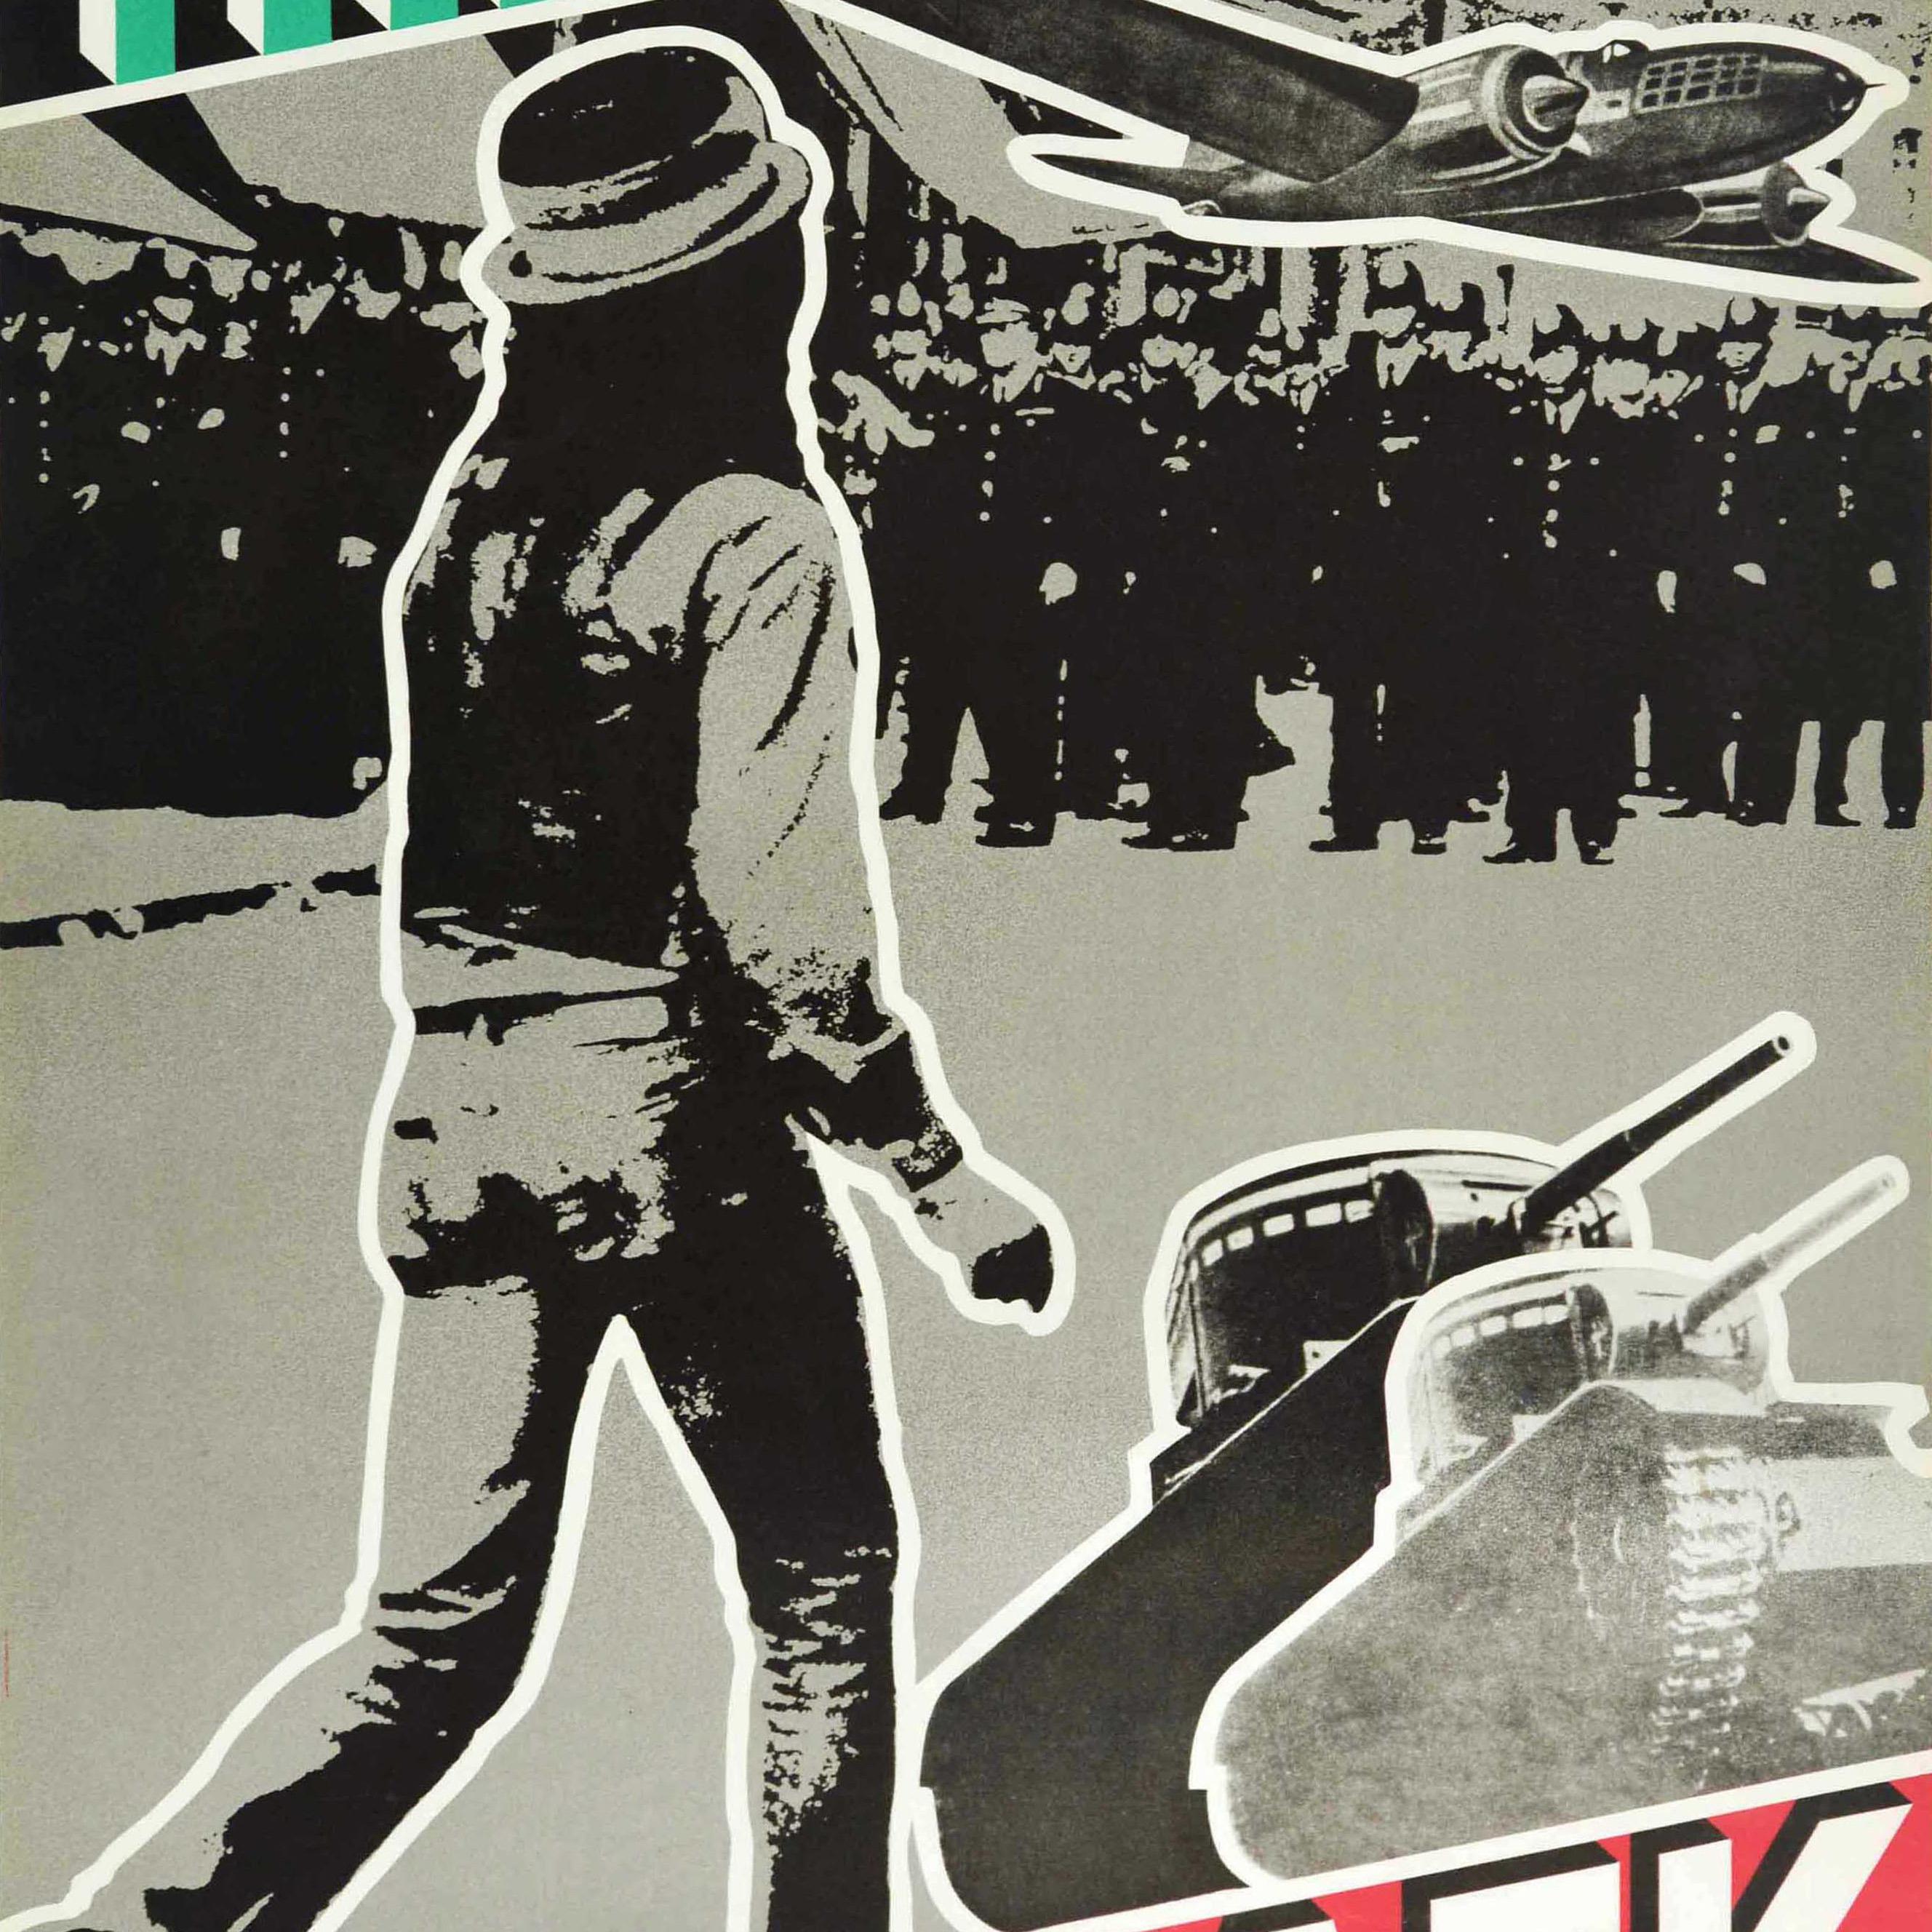 Original vintage music advertising poster for the 1980 album by the English punk rock band The Clash Black Market Clash featuring an iconic collage style illustration in black and white depicting a person walking towards a group of policemen with